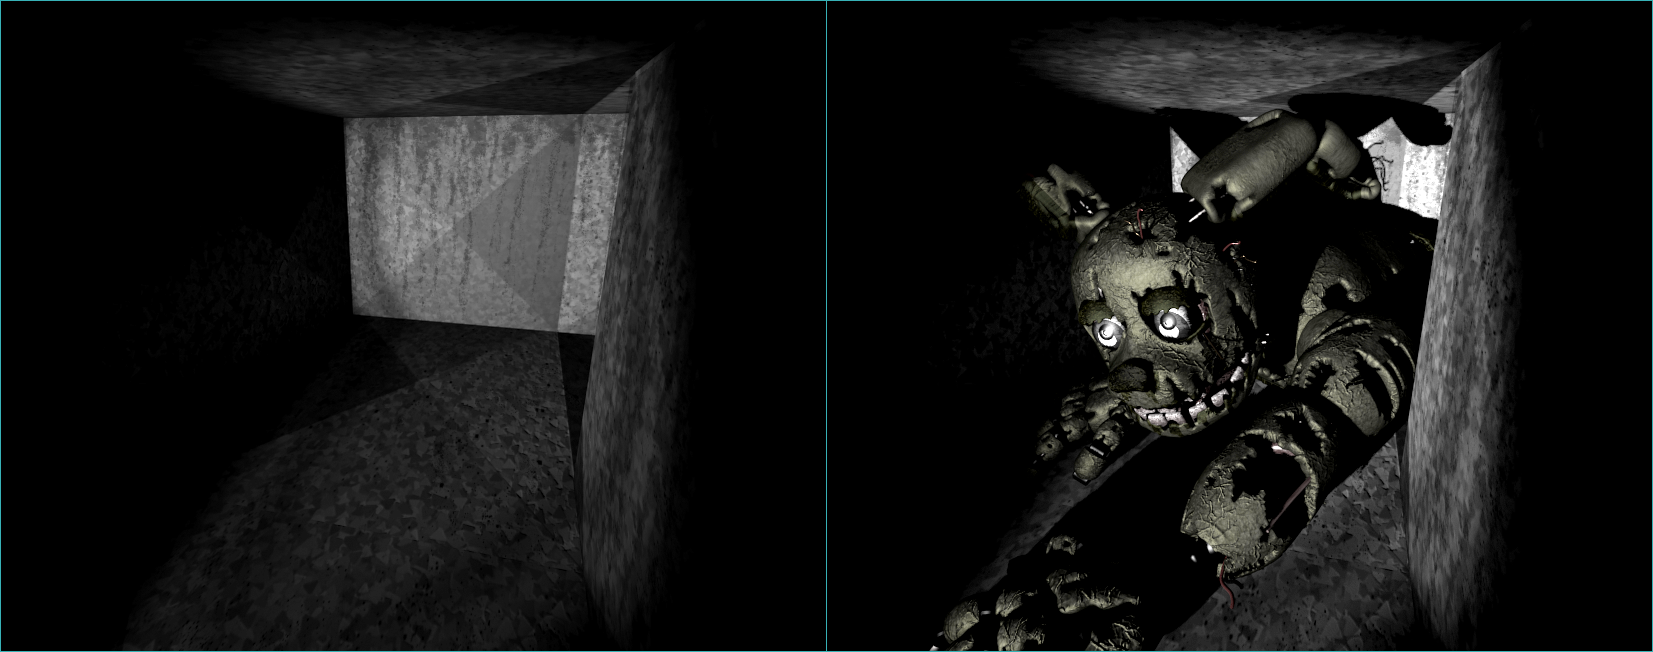 Five Nights at Freddy's 3 - Vent 12